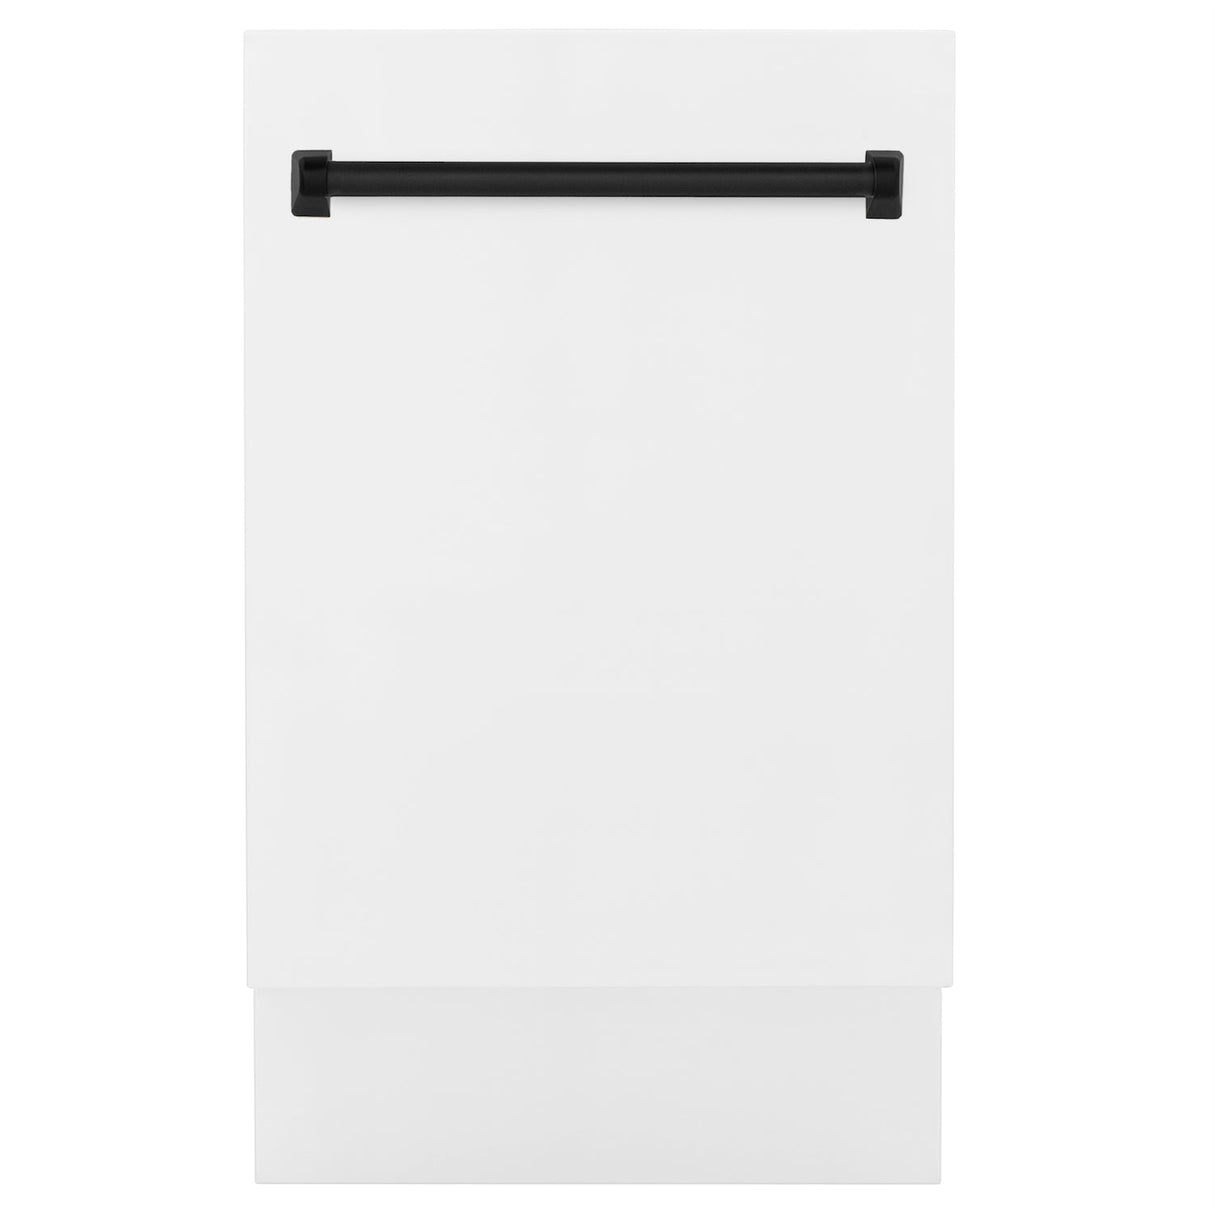 ZLINE Autograph Edition 18 in. Compact 3rd Rack Top Control Dishwasher in White Matte with Matte Black Accent Handle, 51dBa (DWVZ-WM-18-MB)